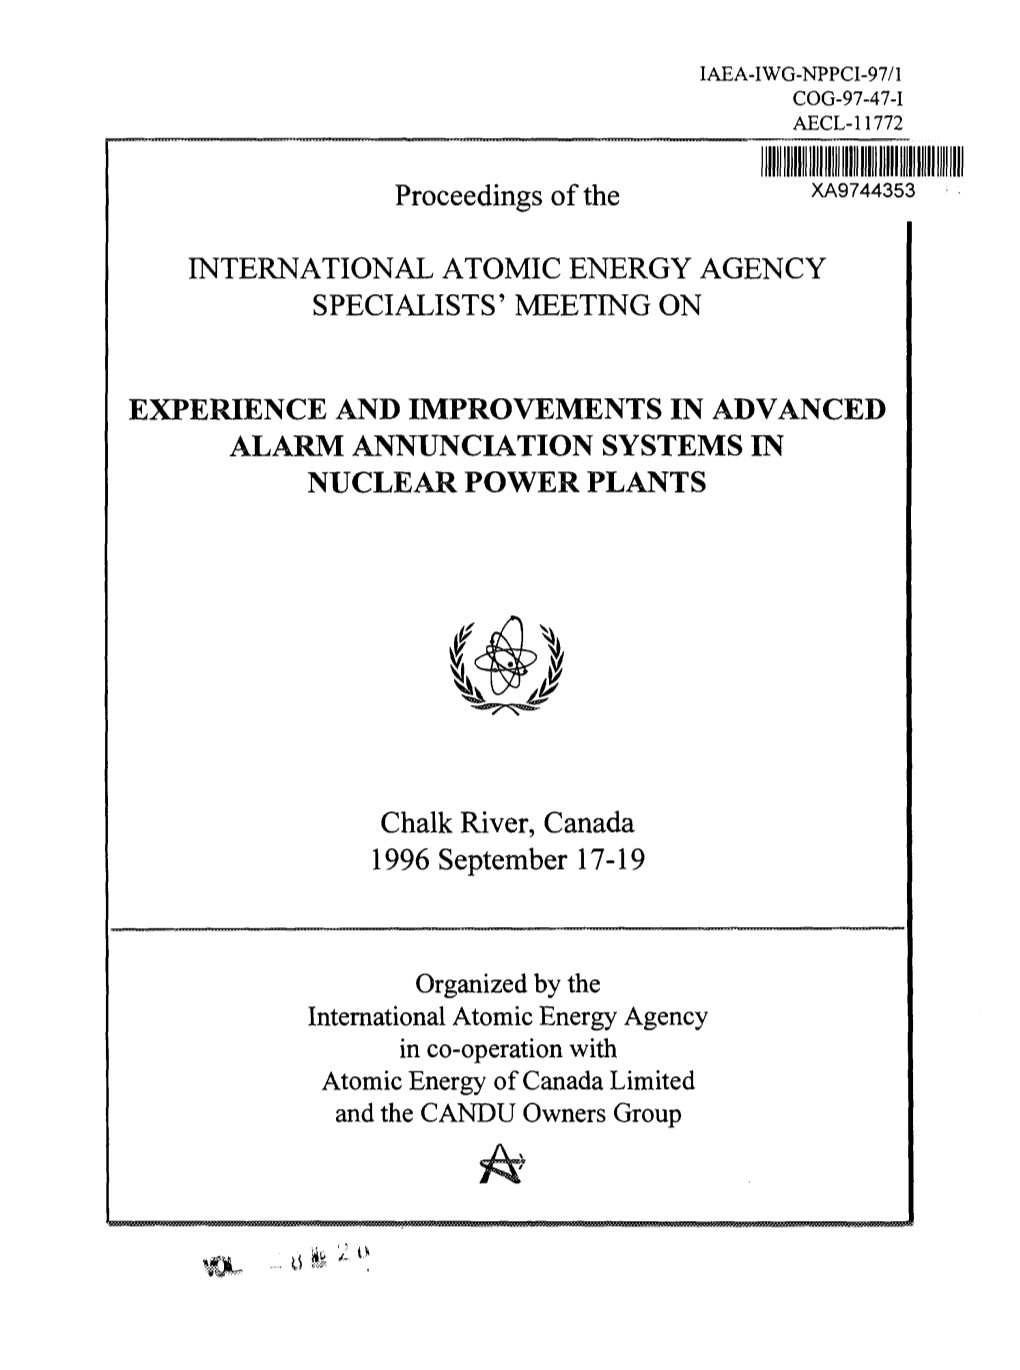 International Atomic Energy Agency Specialists' Meeting On